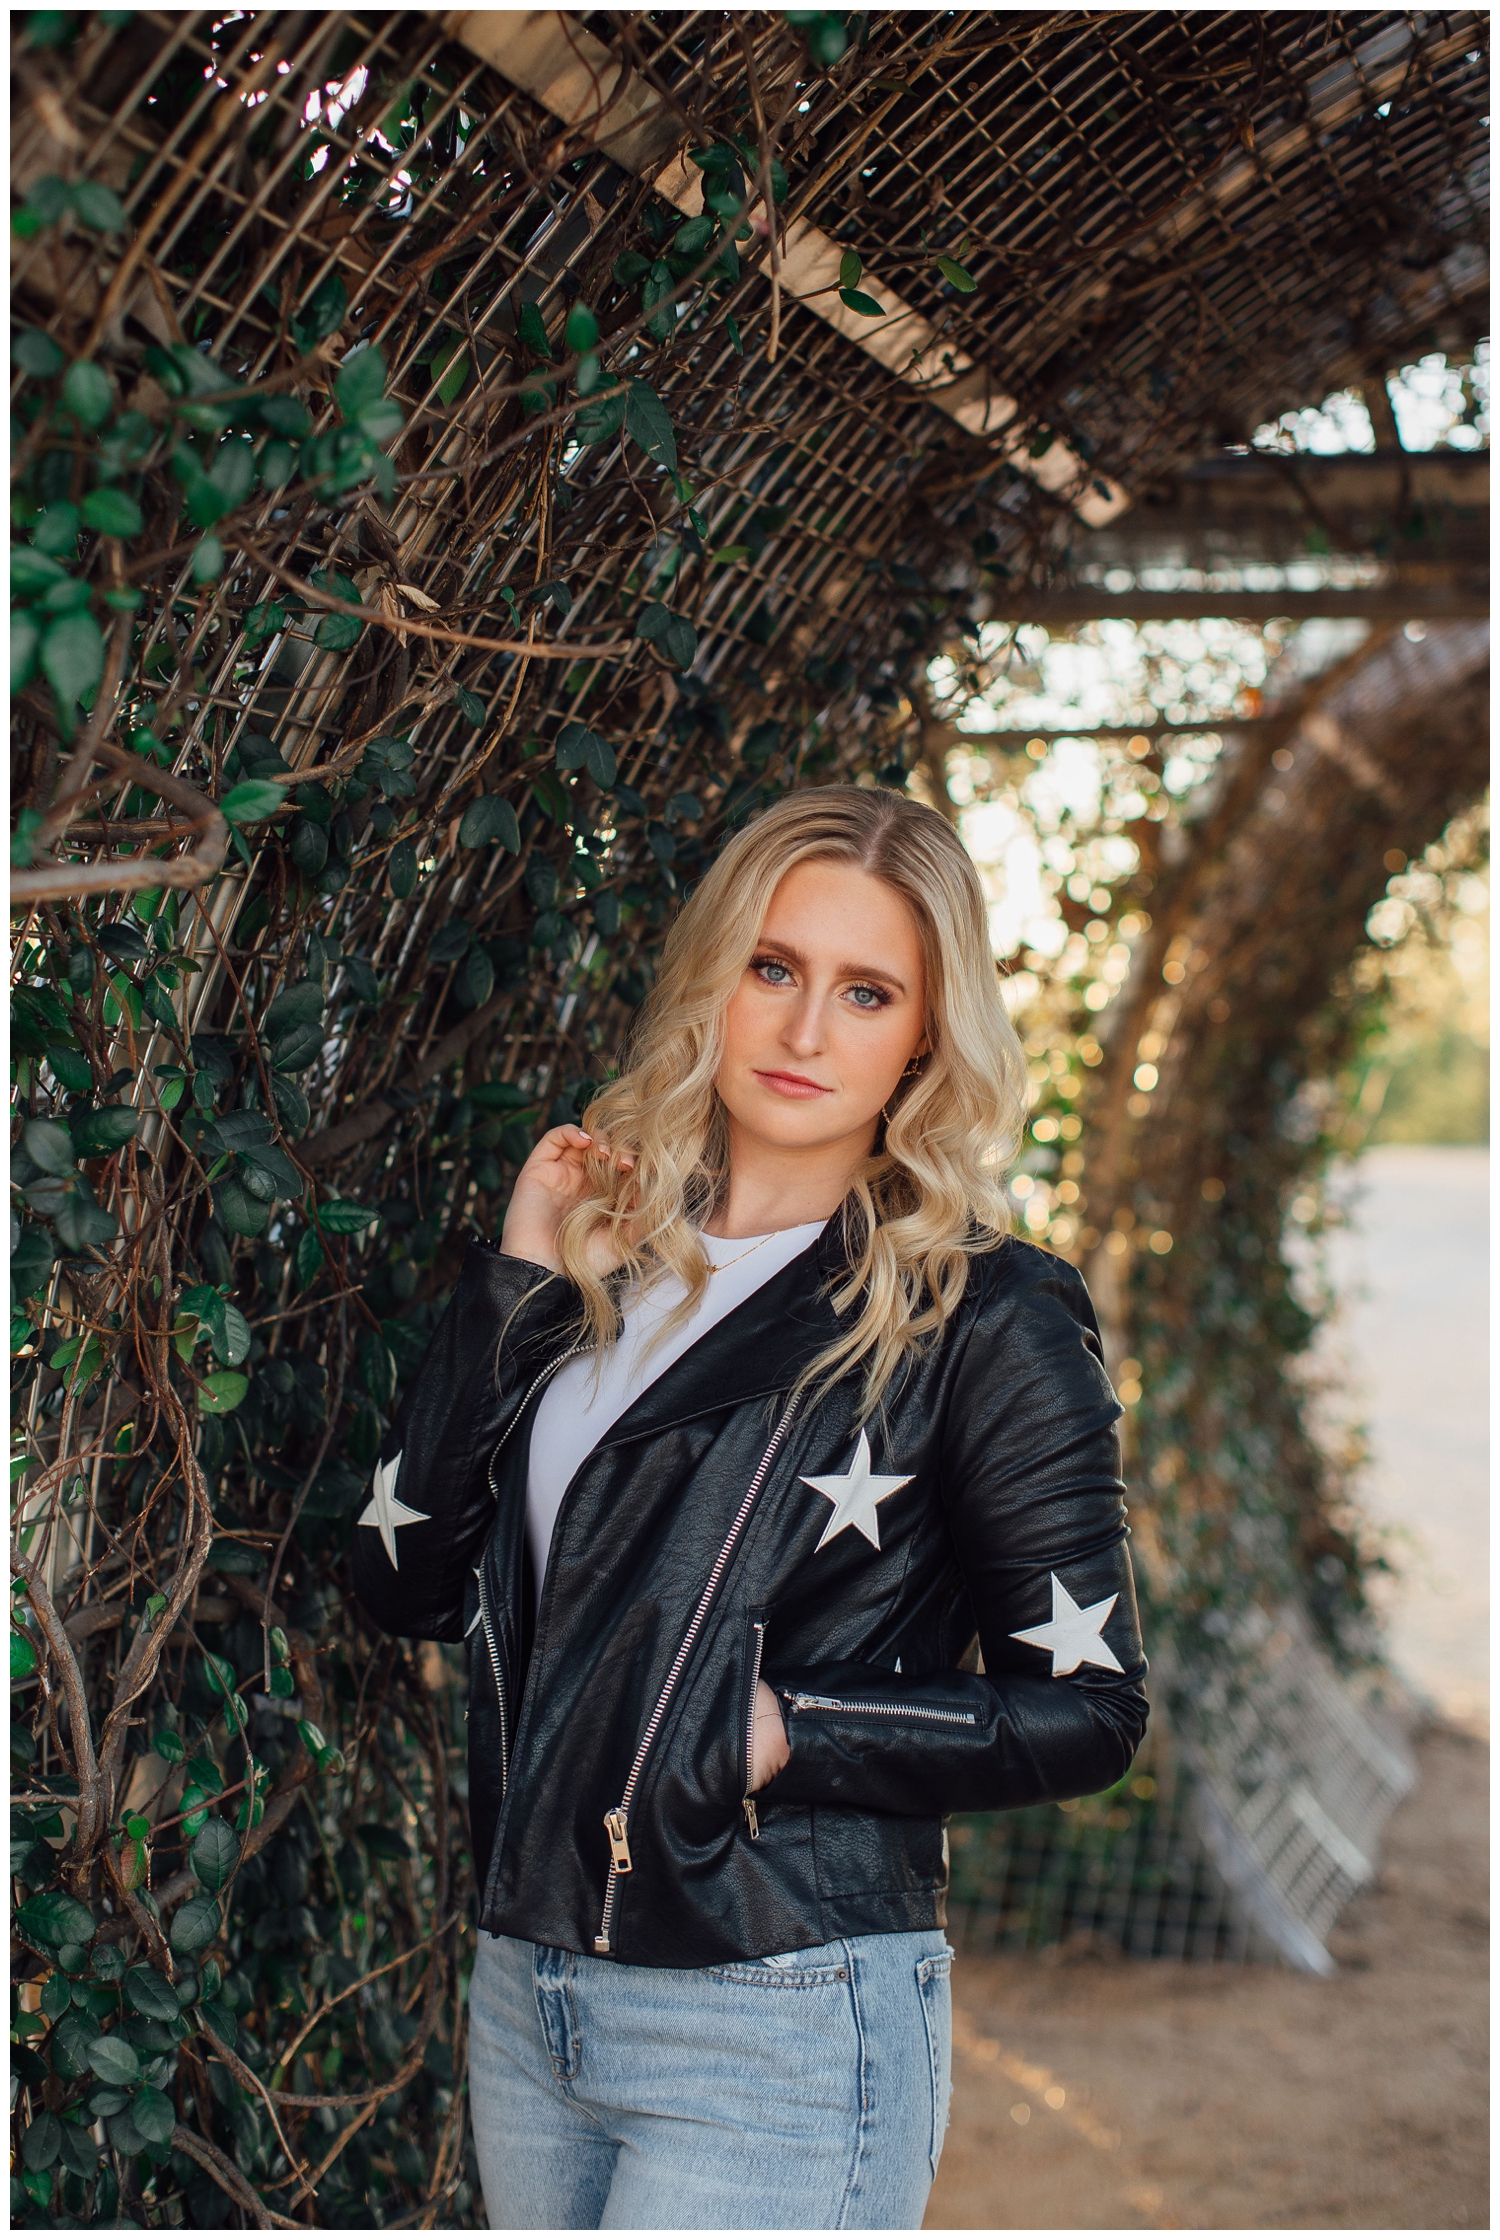 girl in black jacket with stars standing by garden arch at Sabine Street for senior pictures Houston